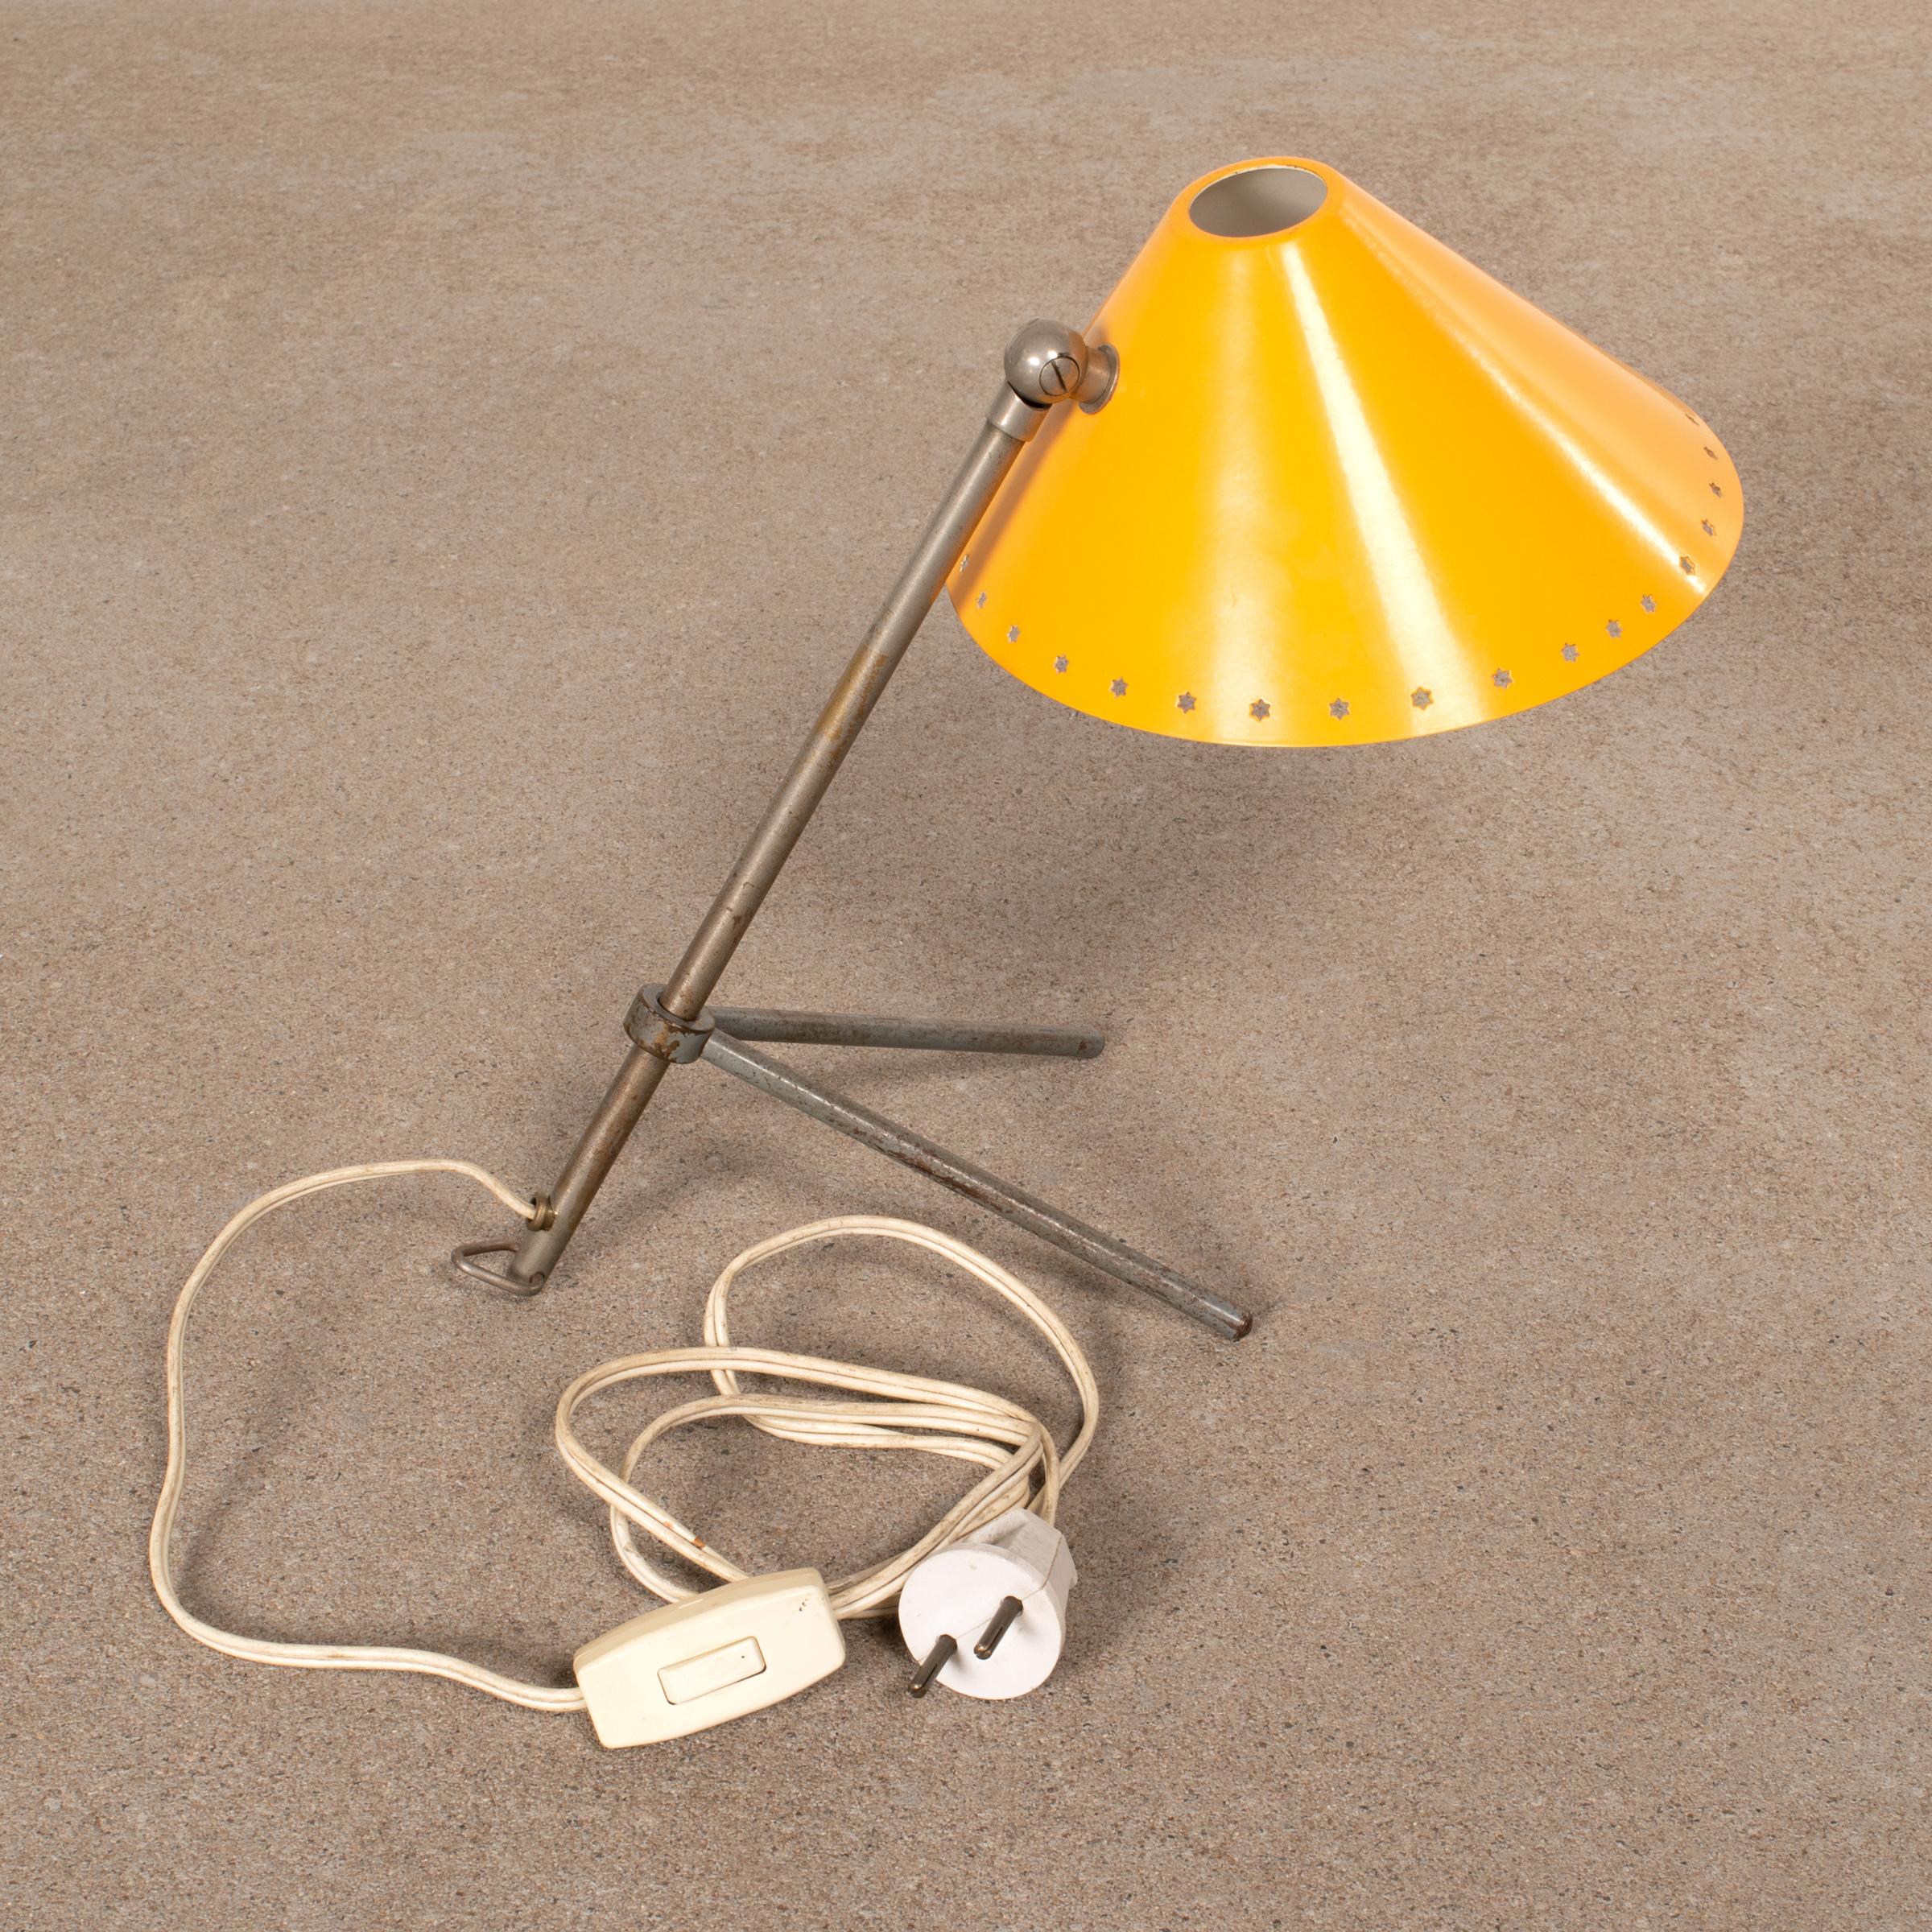 Steel Pinocchio Lamps by H. Busquet for Hala Zeist, Netherlands